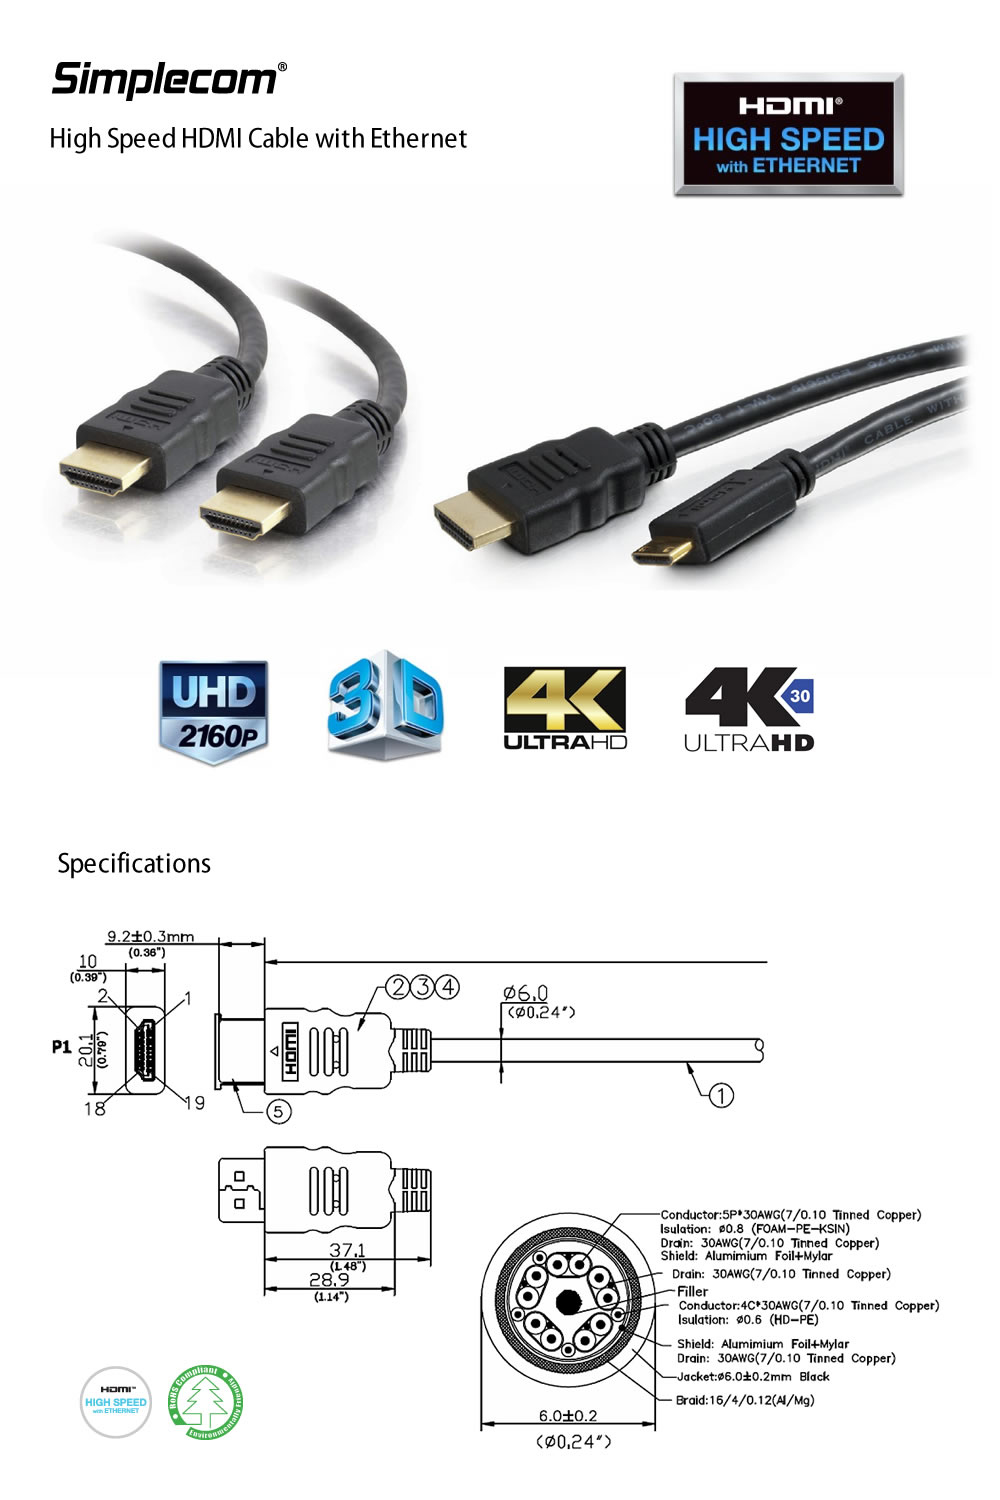 HDMI-Cables-Simplecom-CAH405-High-Speed-HDMI-Cable-with-Ethernet-0-5m-1